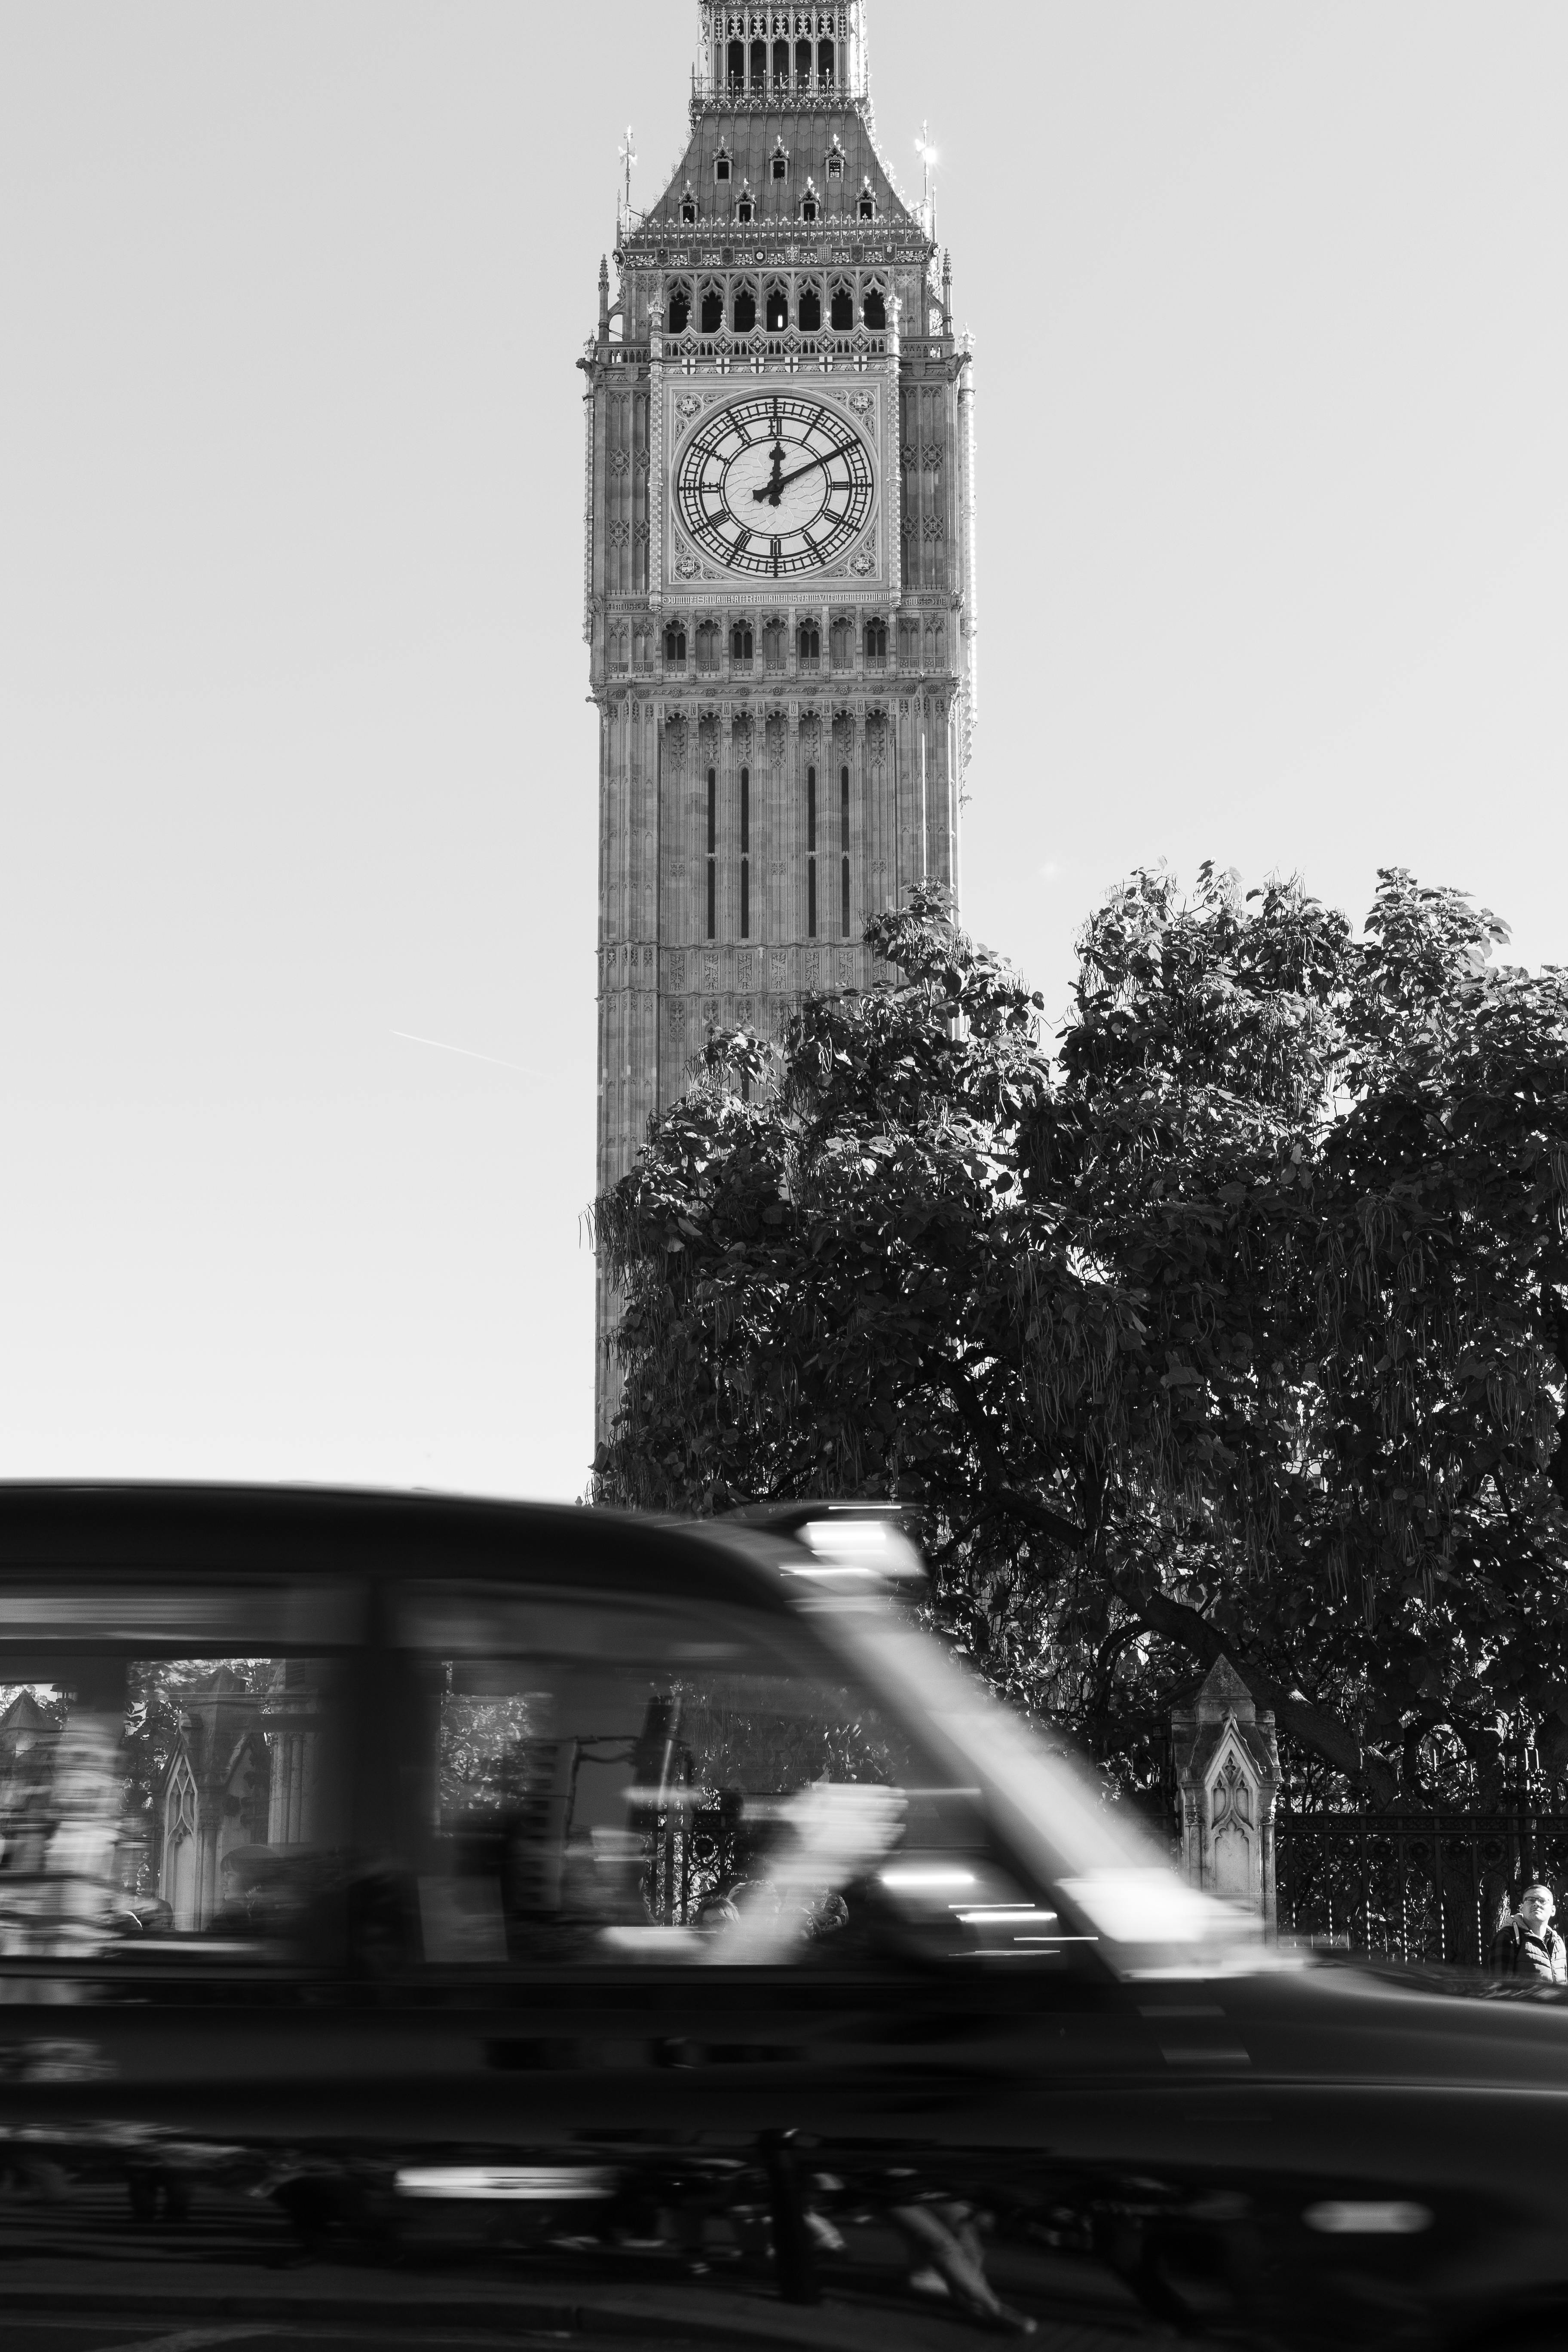 Taxi Passing by Elizabeth Tower Also Known as London Big Ben in 